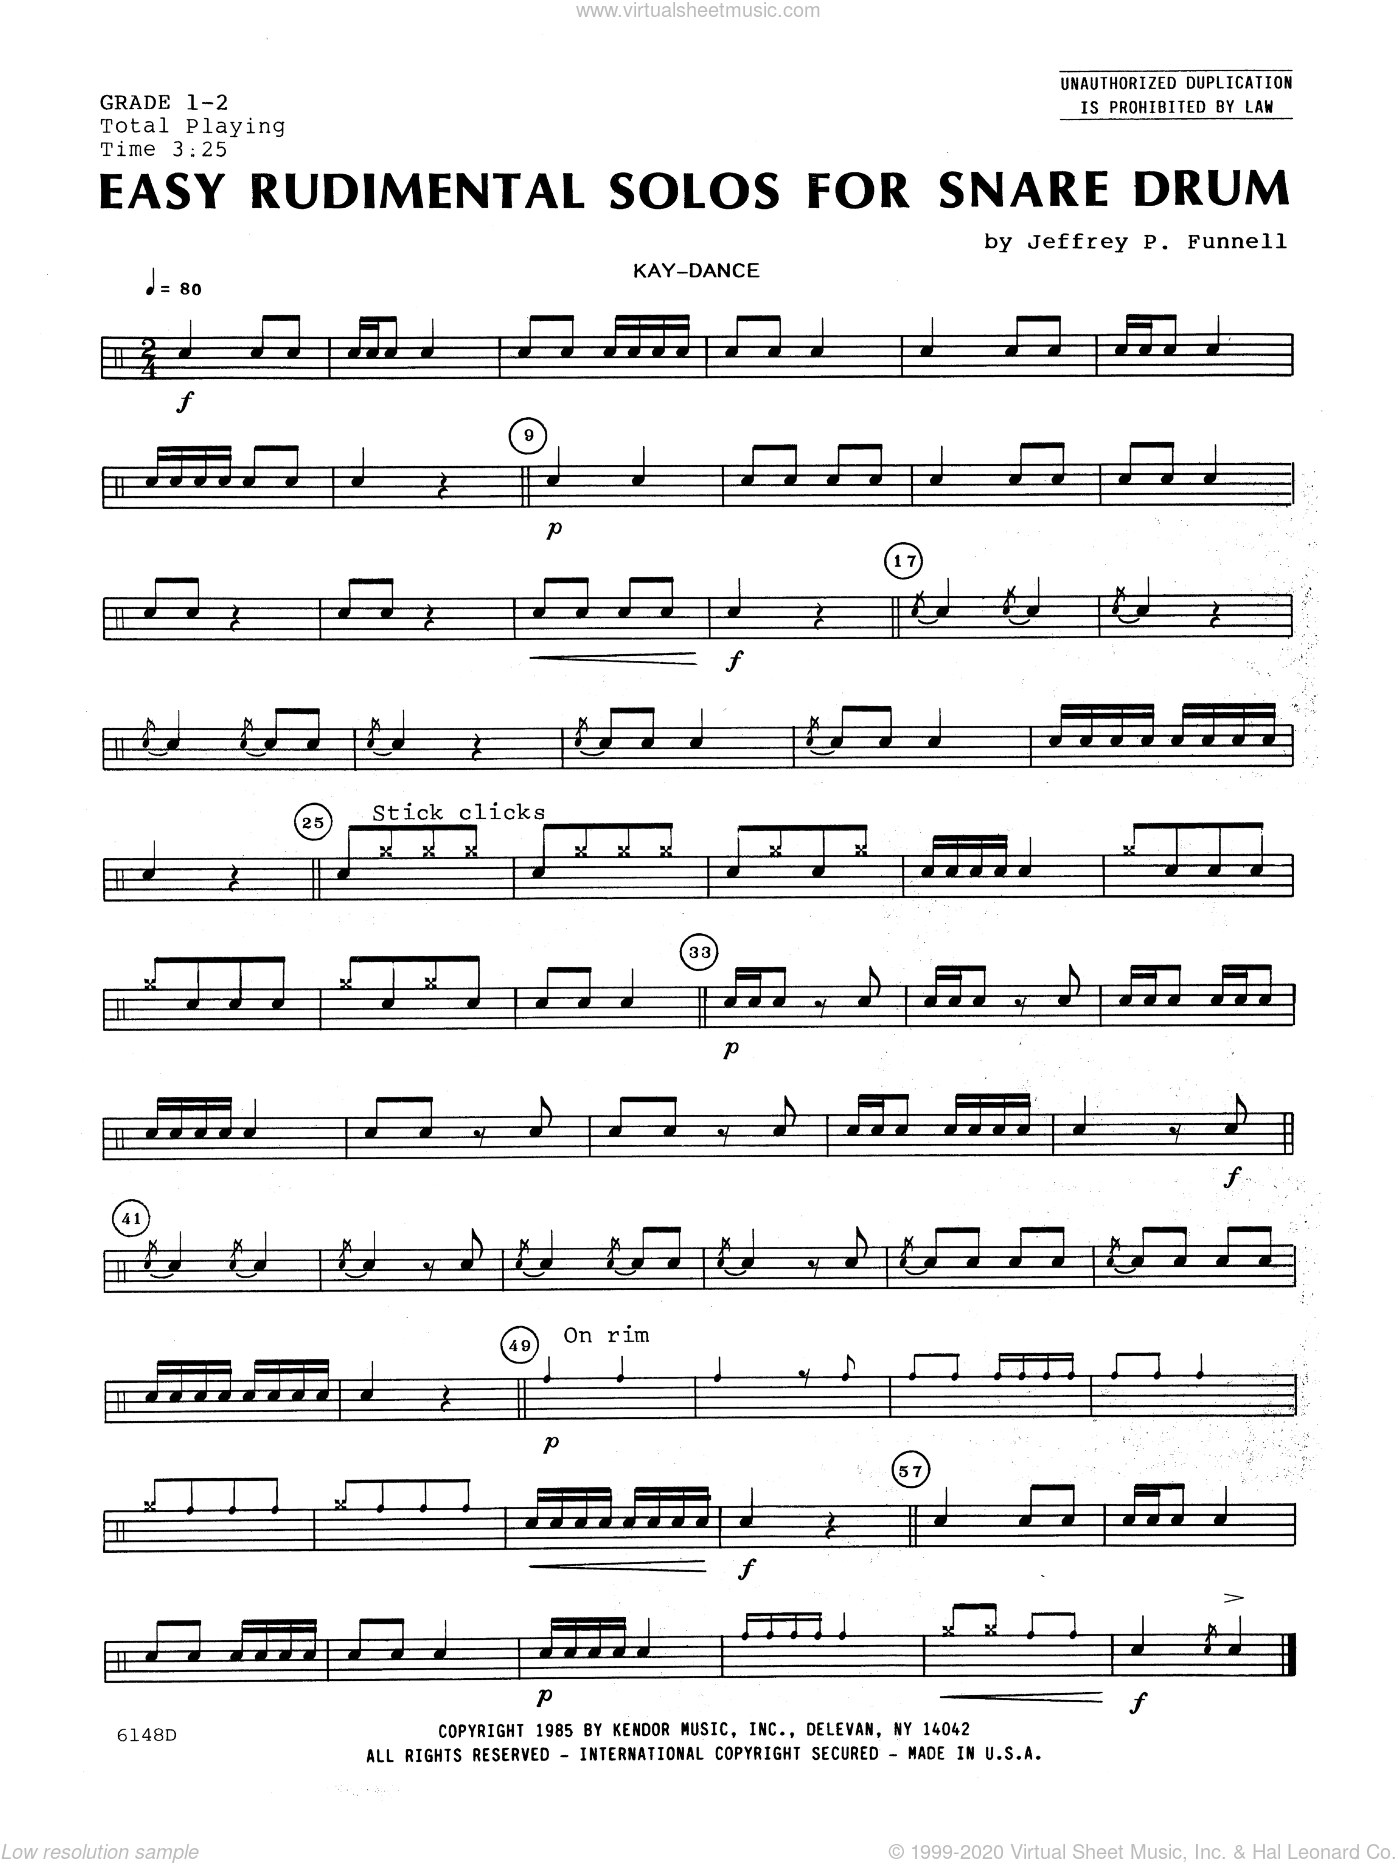 Funnell - Easy Rudimental Solos For Snare Drum sheet music for percussions